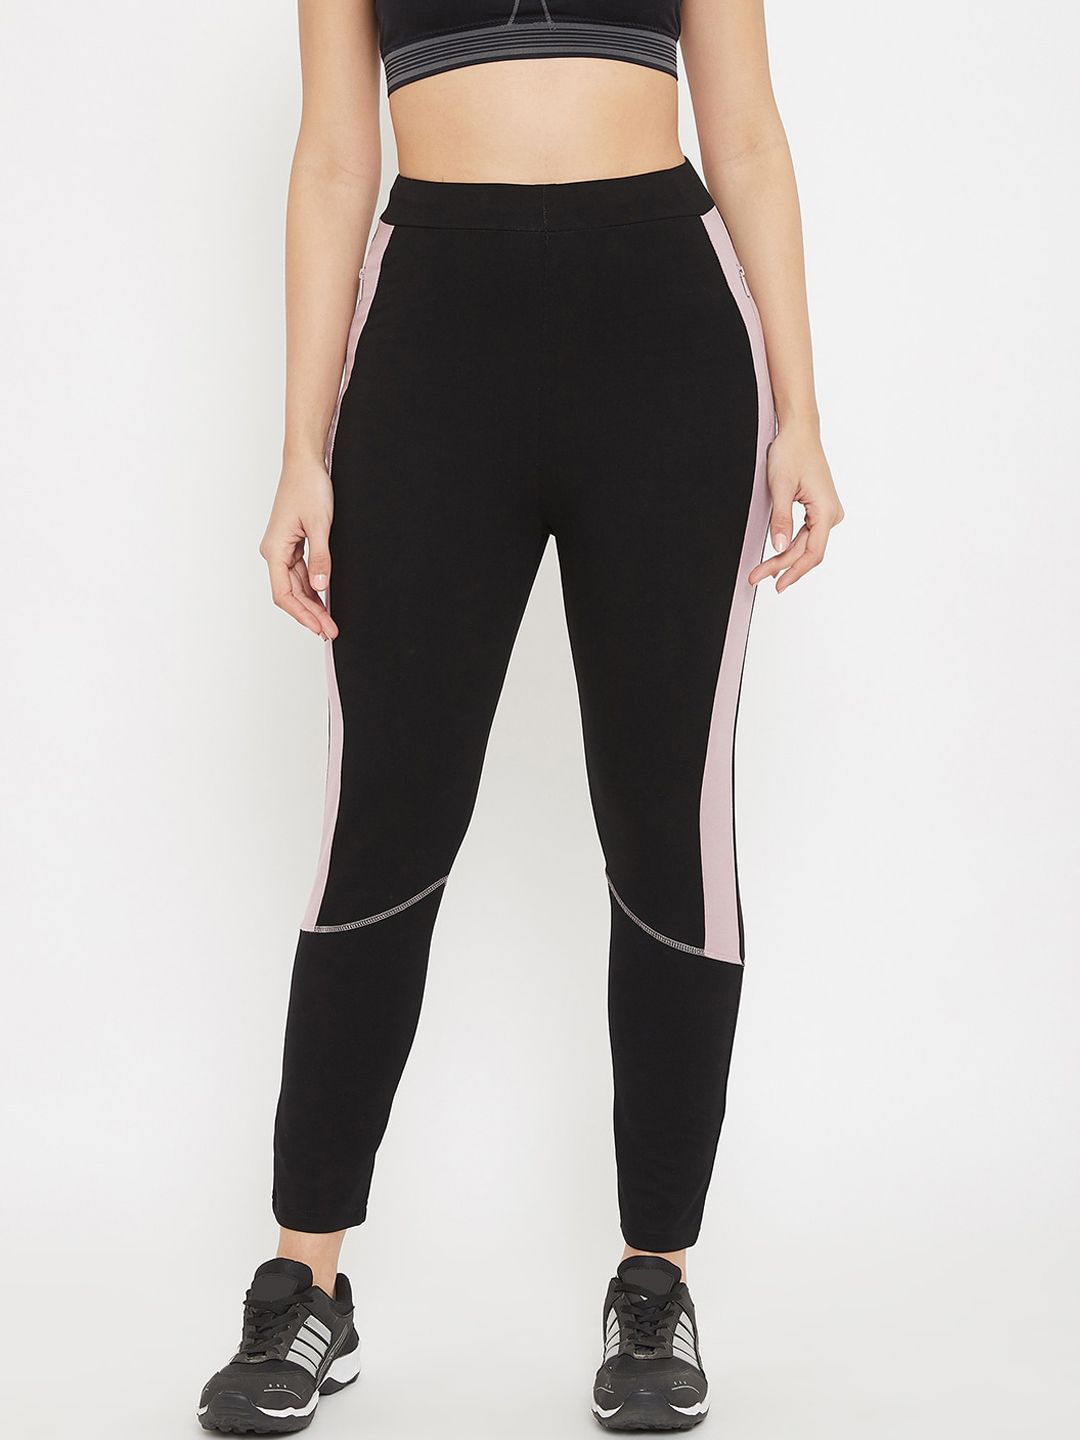 C9 AIRWEAR Women Black & Pink Solid Active Track Pants Price in India